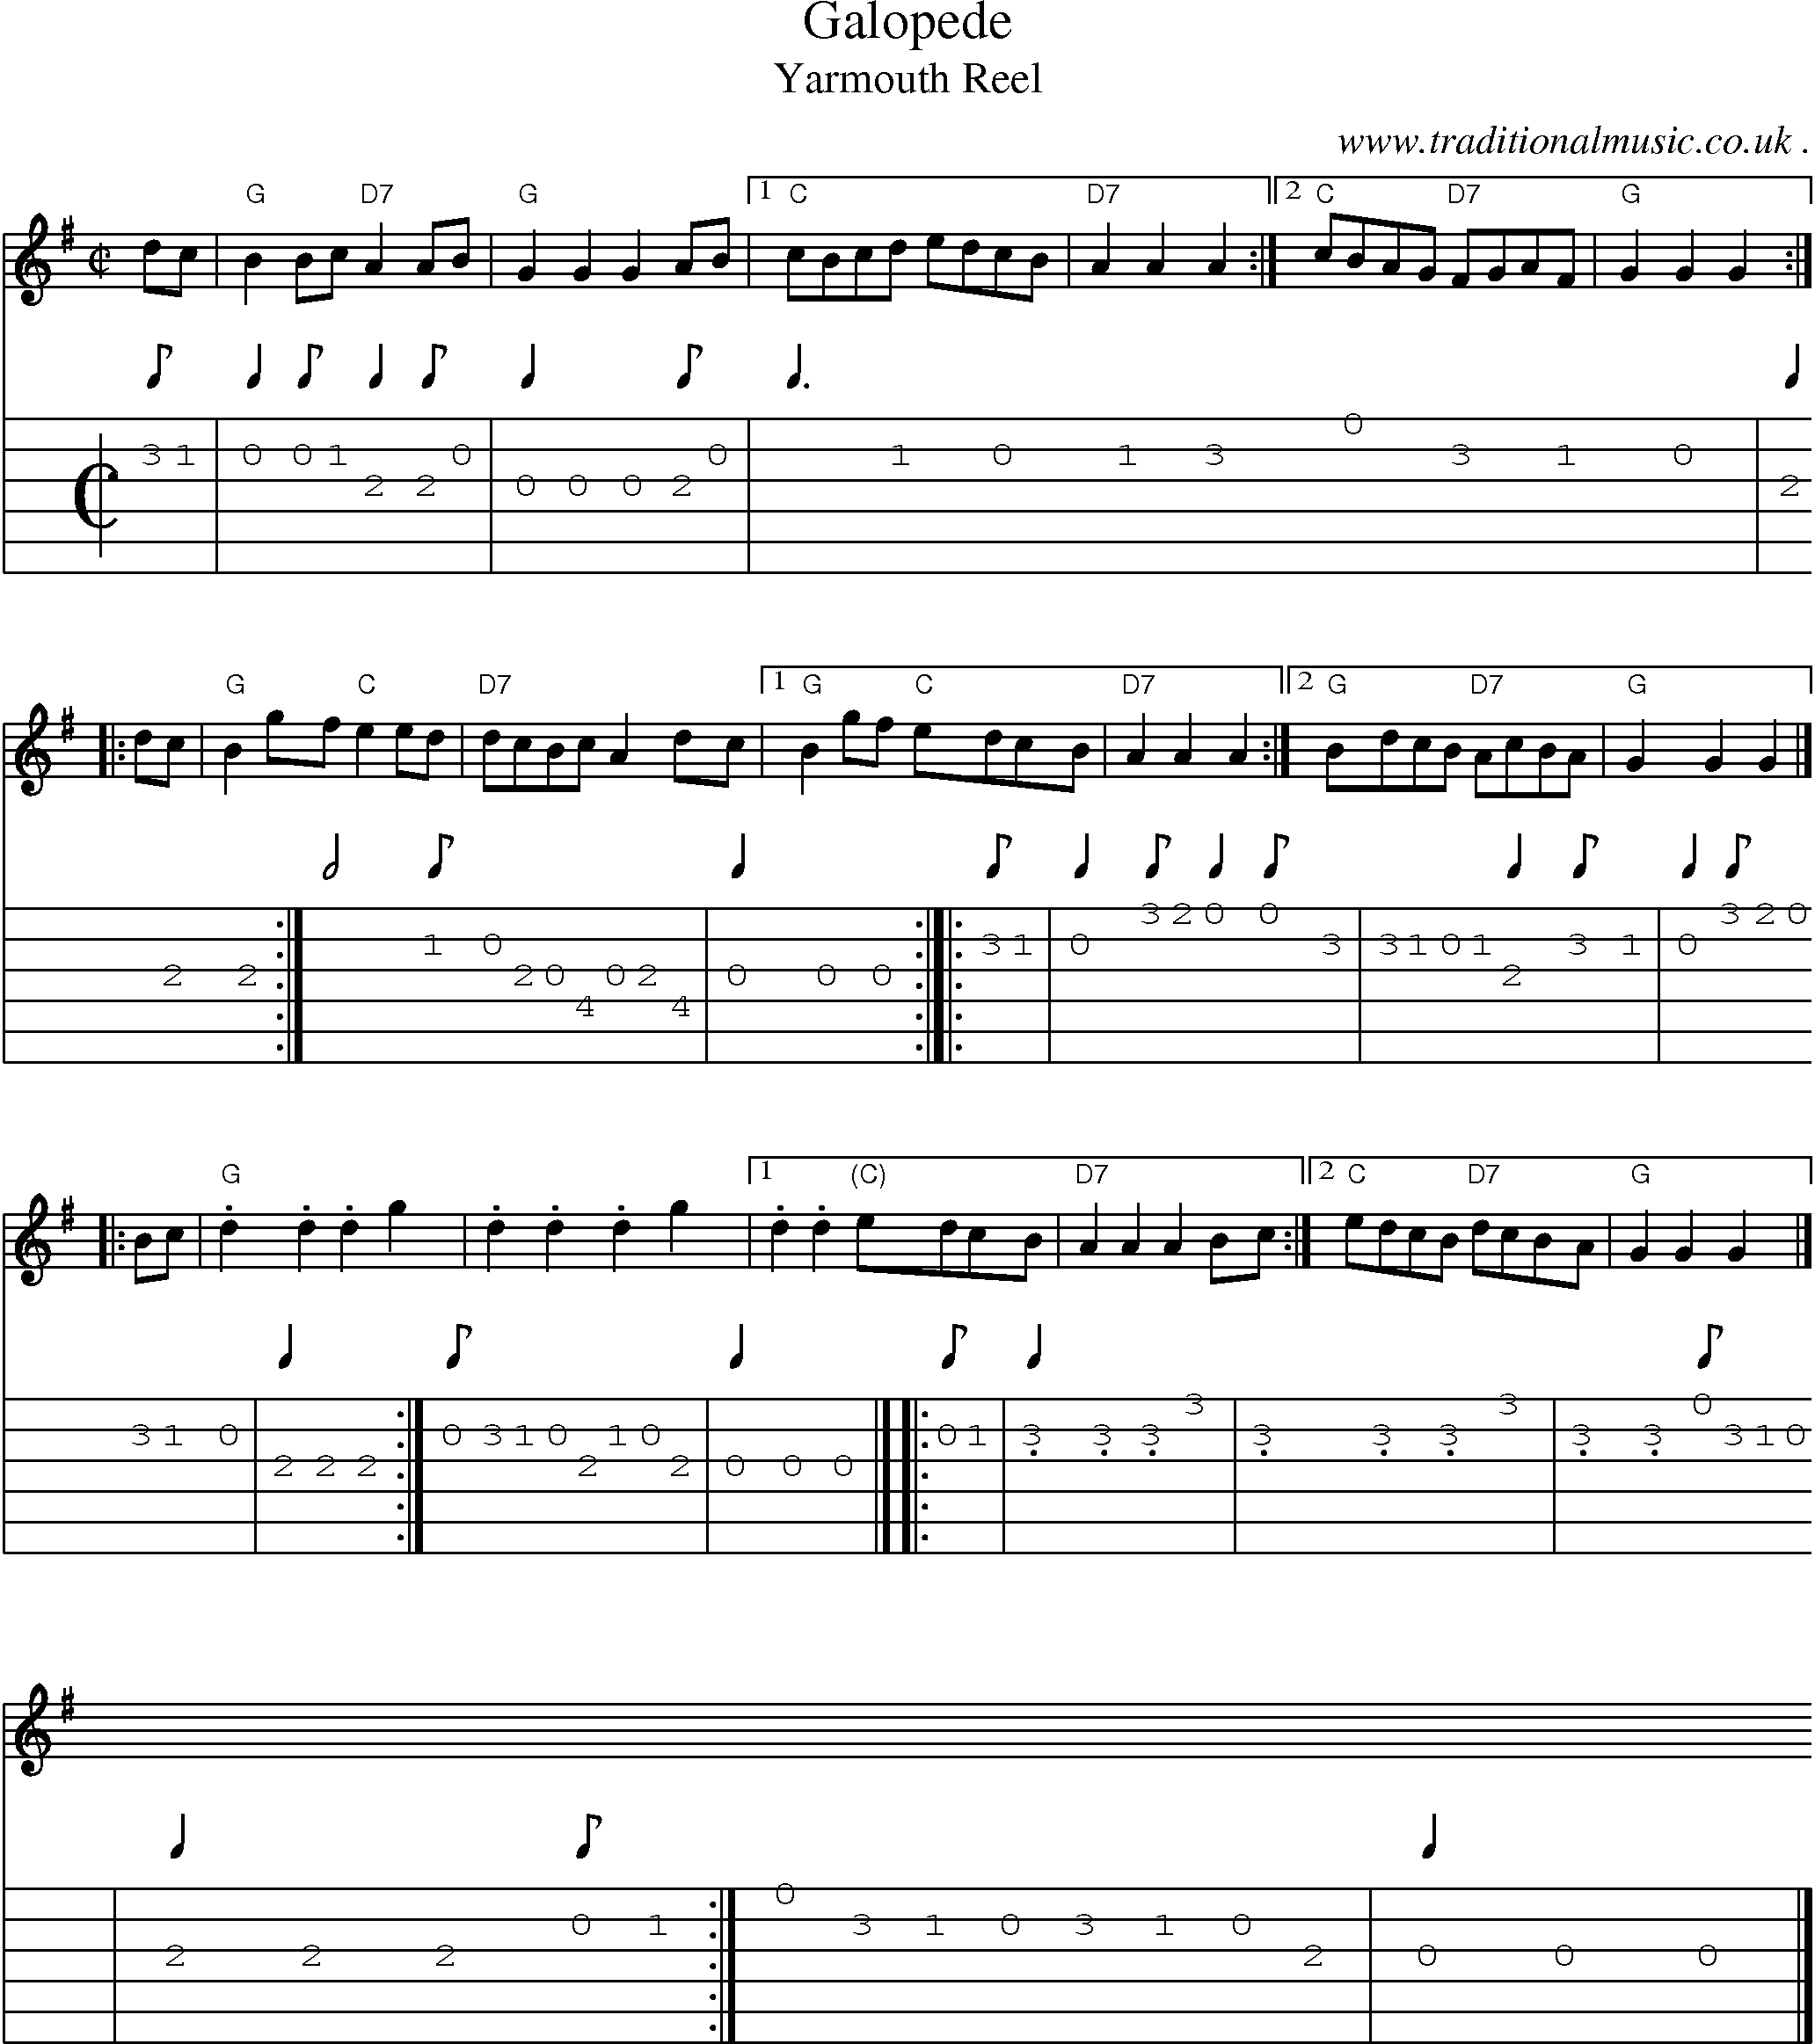 Sheet-music  score, Chords and Guitar Tabs for Galopede